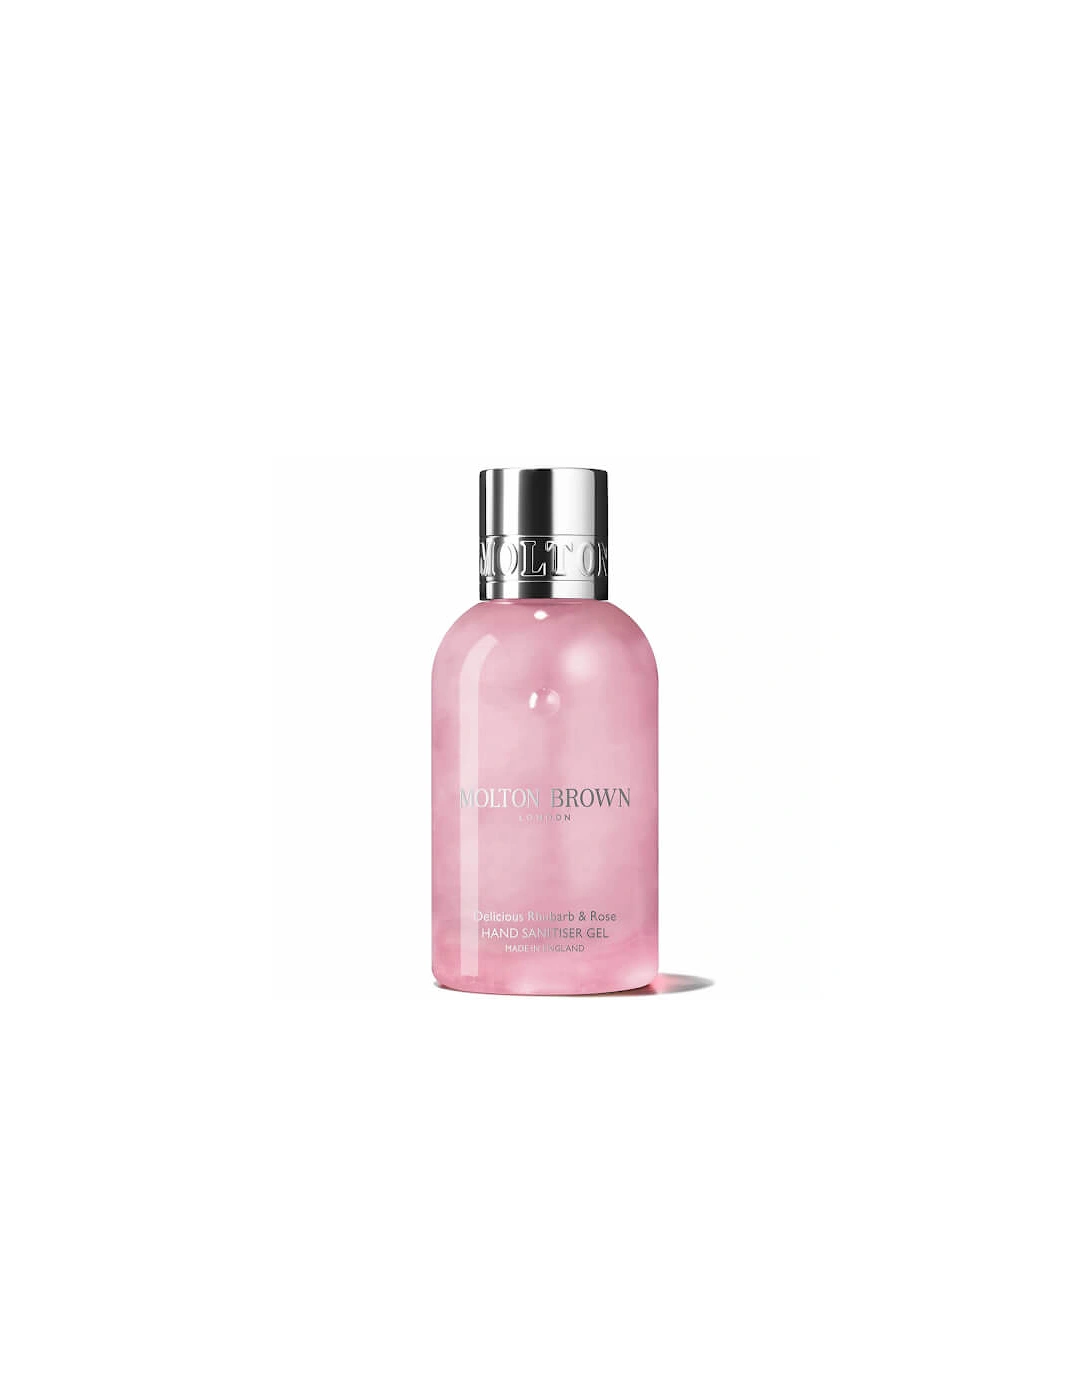 Delicious Rhubarb and Rose Hand Sanitiser Gel 100ml, 2 of 1